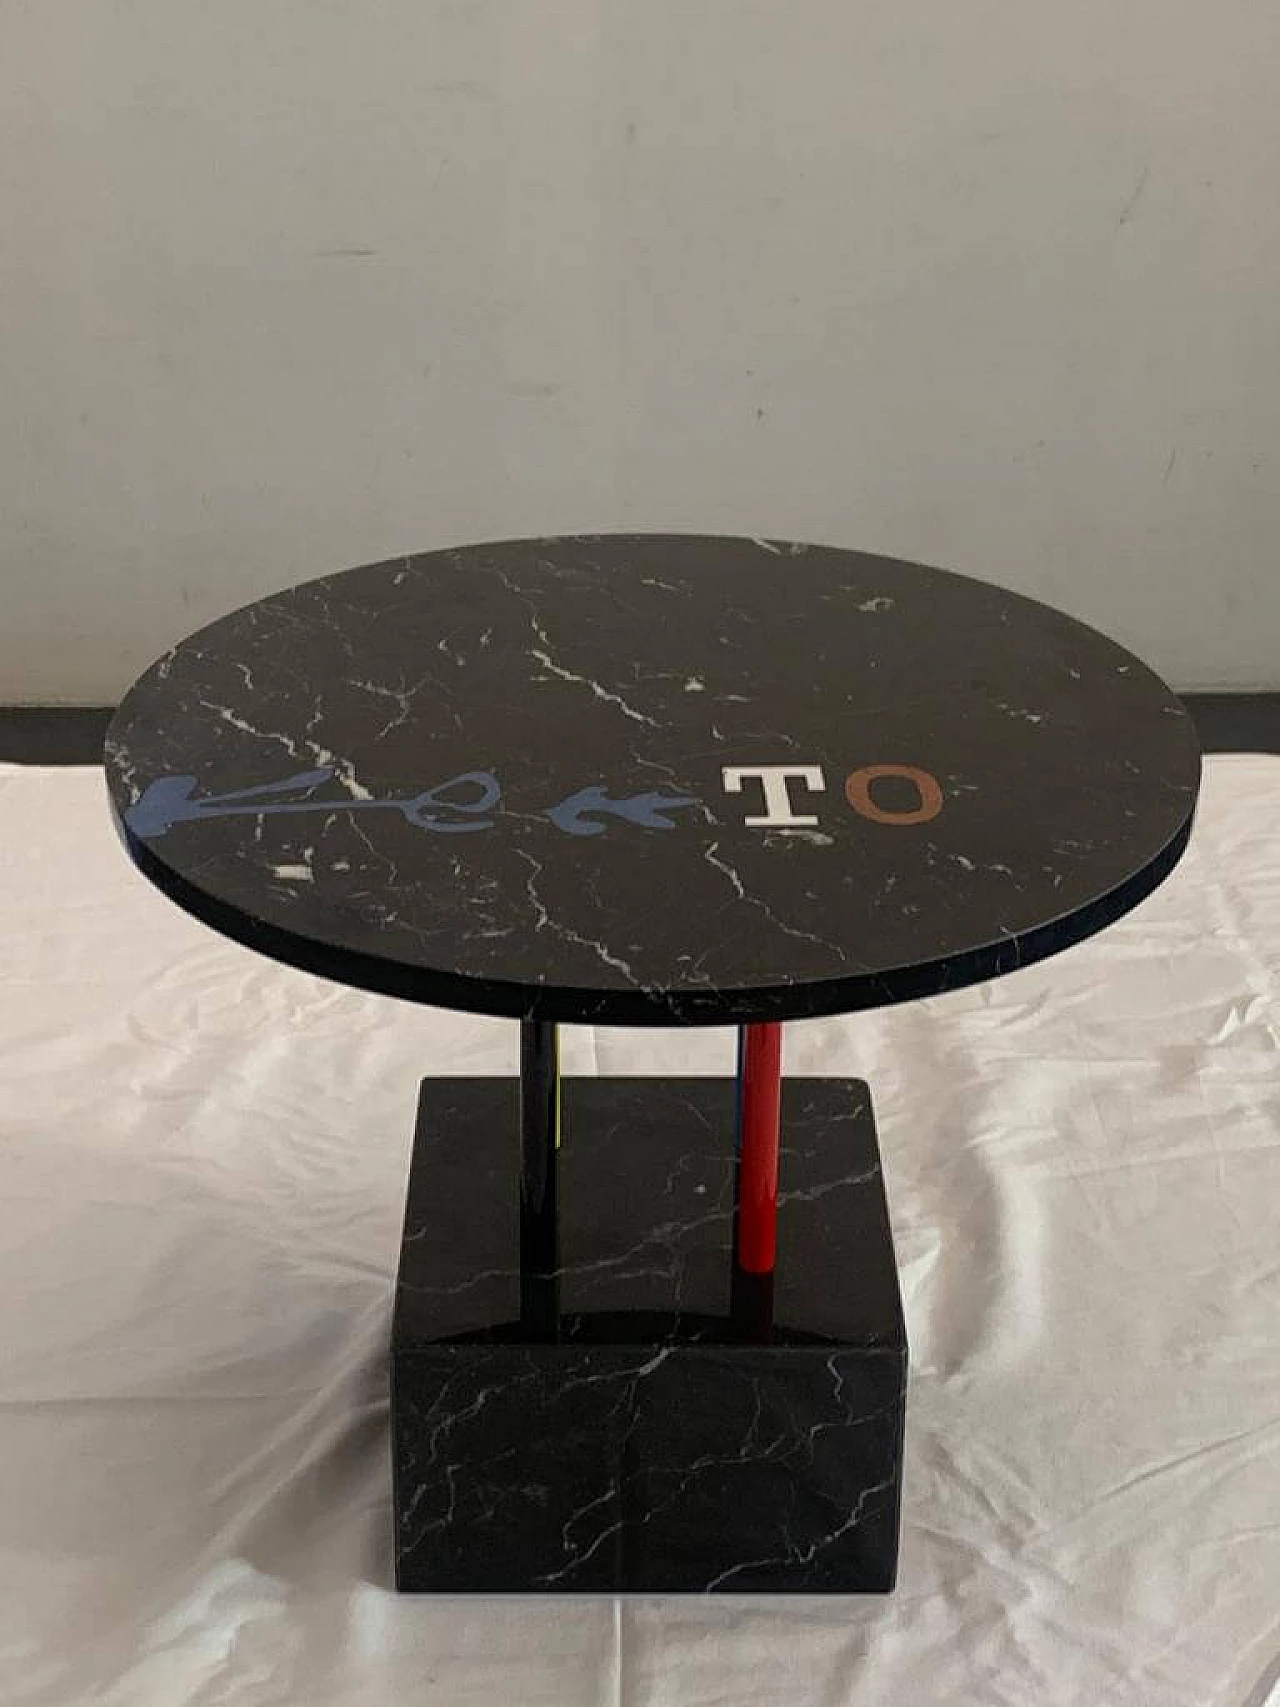 Kleeto coffee table by Cleto Munari, unique piece with inlaid marble 1312101